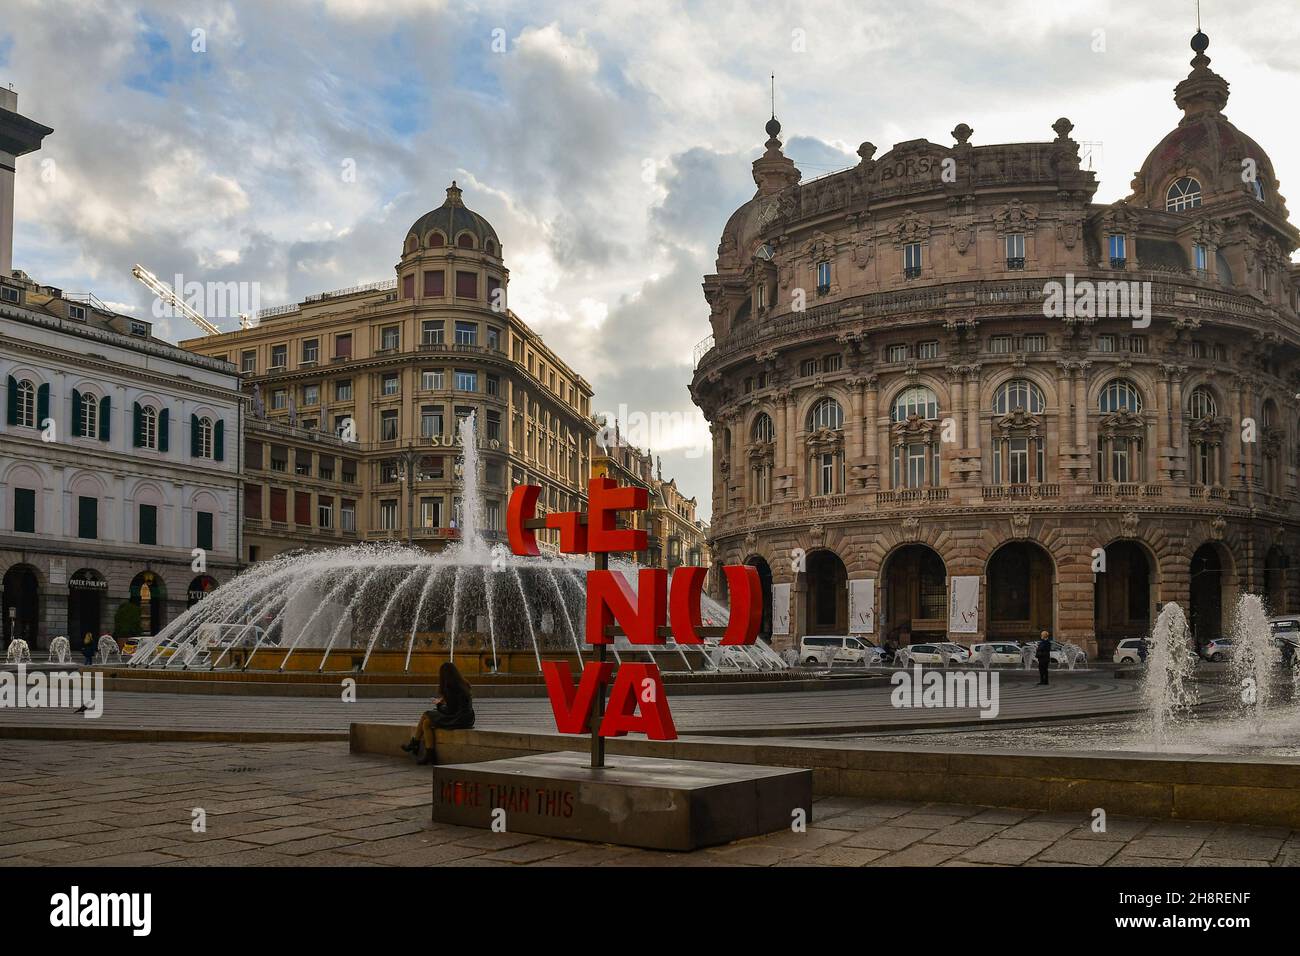 Piazza De Ferrari square in the city centre with the city logo, the fountain and the Stock Exchange building in a cloudy autumn day, Genoa, Liguria Stock Photo